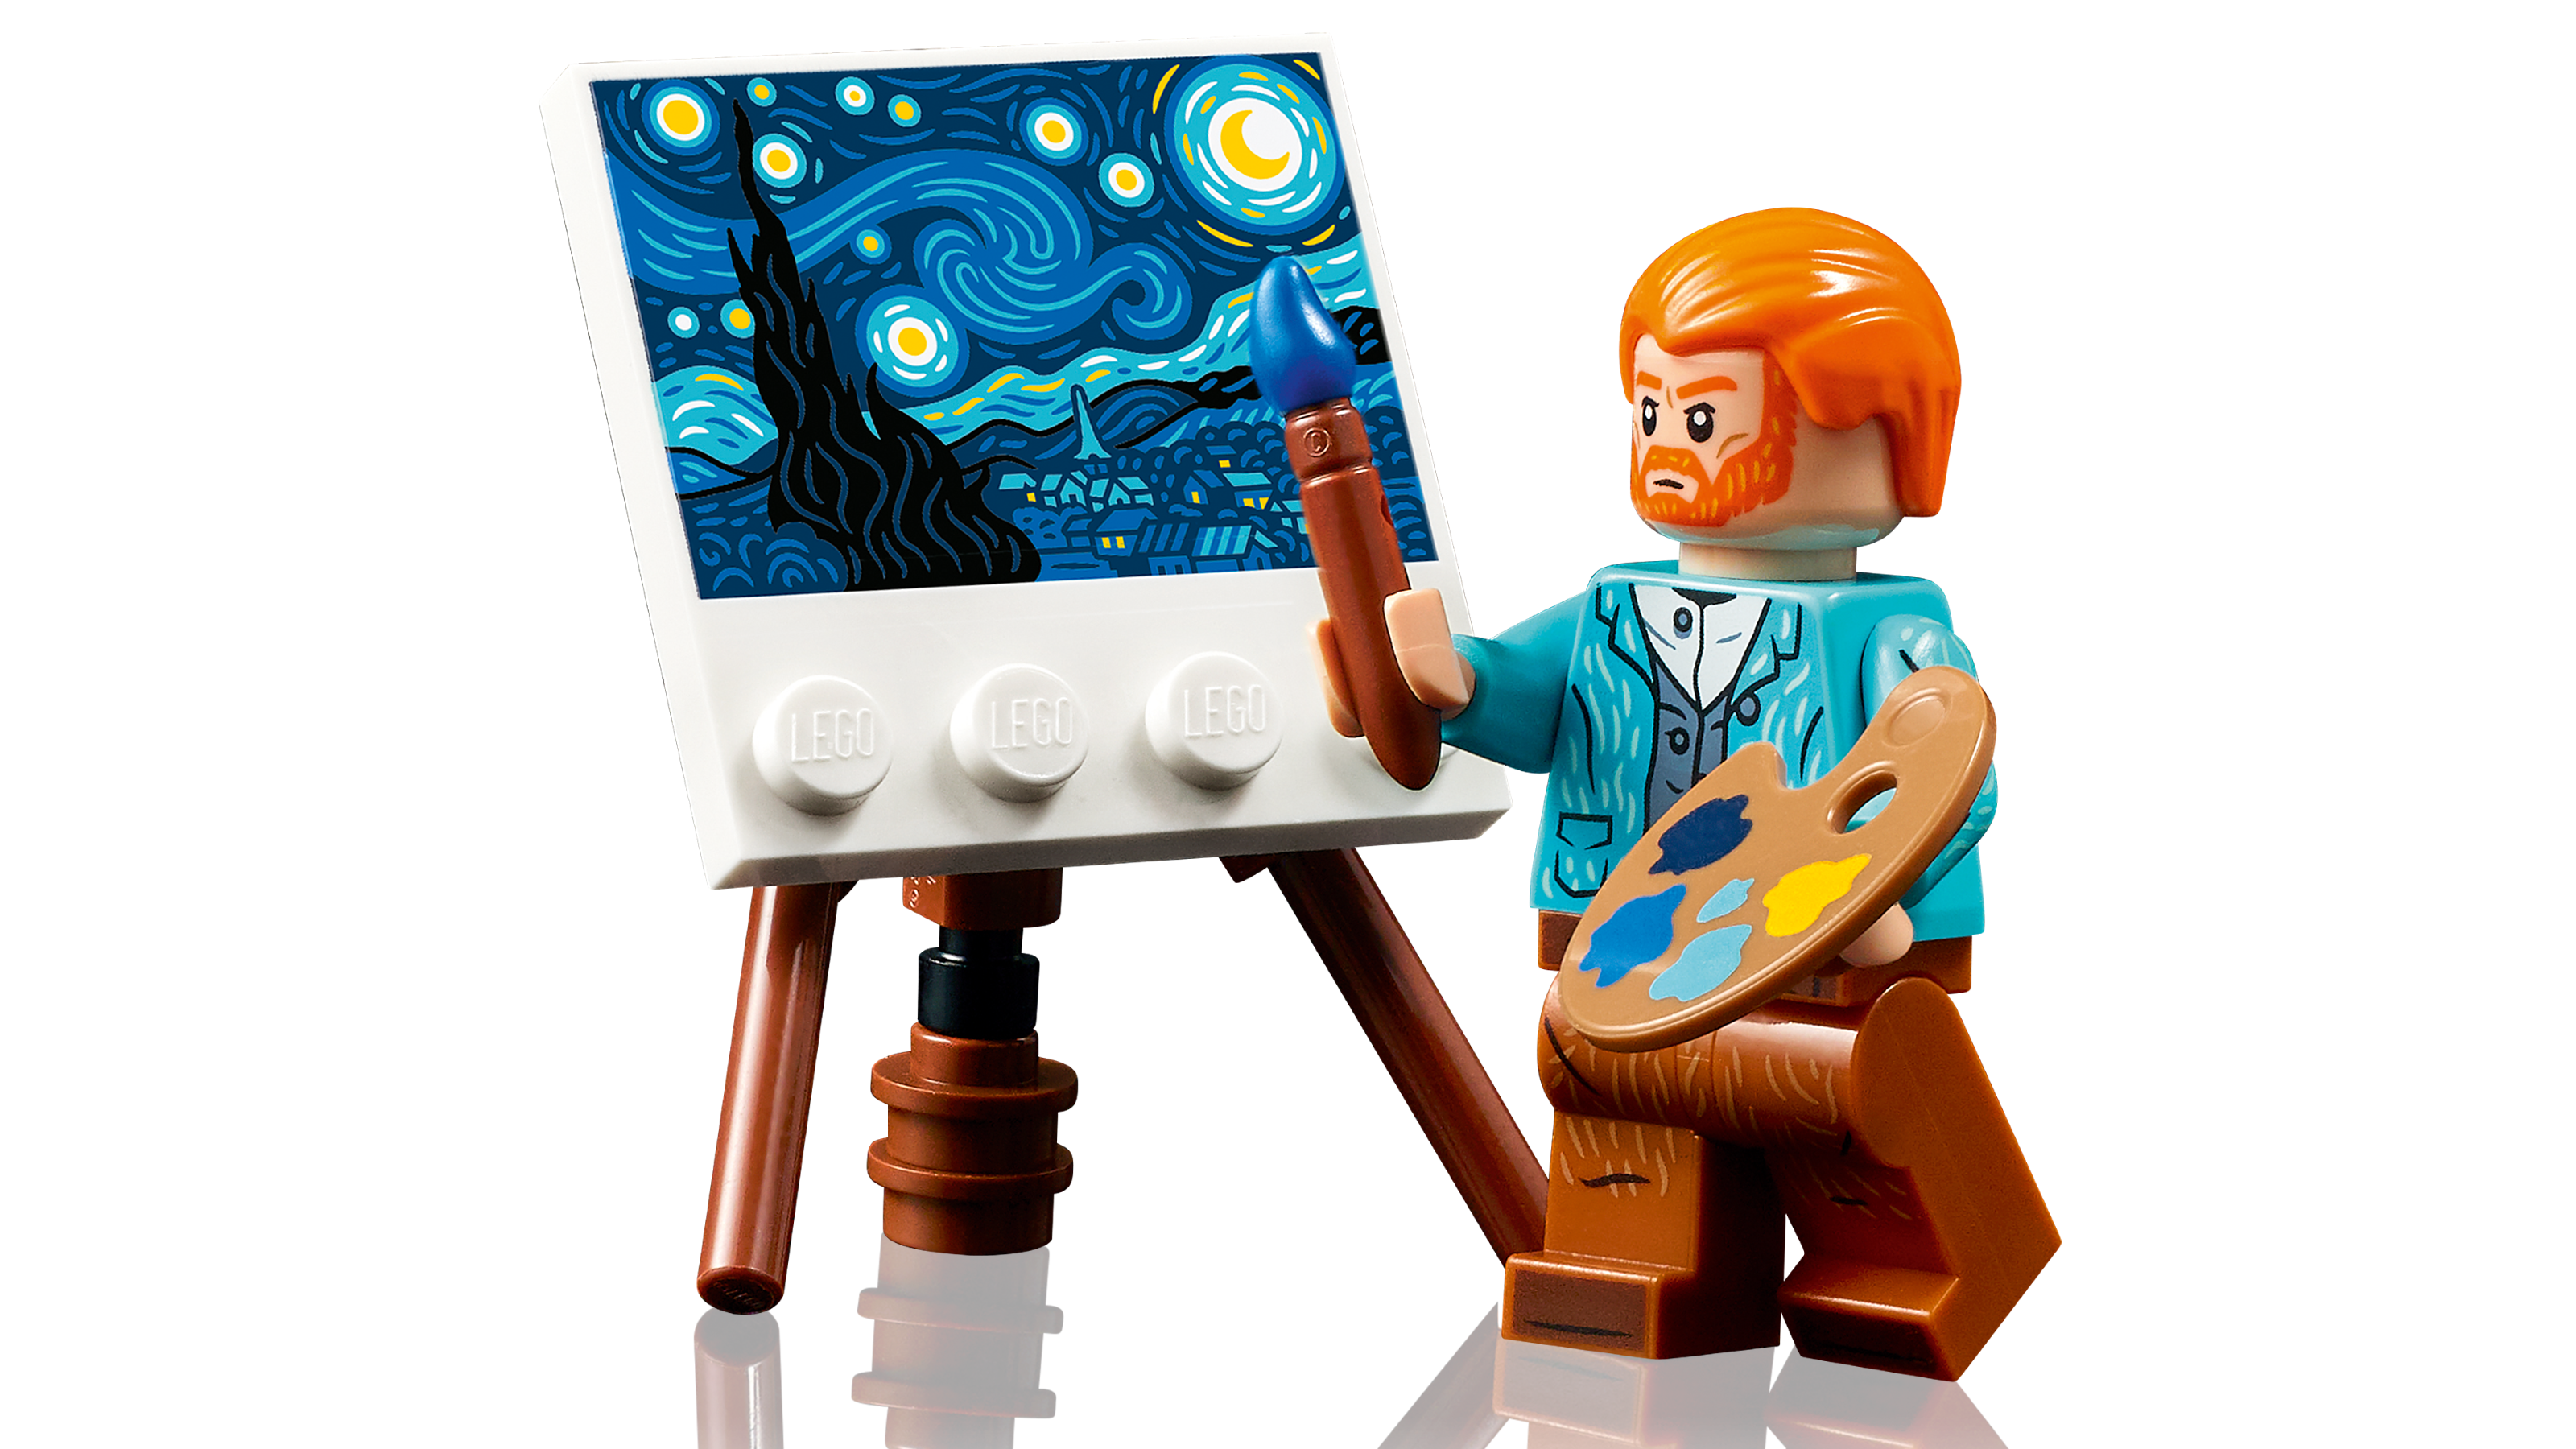  YEABRICKS LED Light for Lego-21333 Ideas Vincent Van Gogh - The  Starry Night Building Blocks Model (Lego Set NOT Included) : Toys & Games